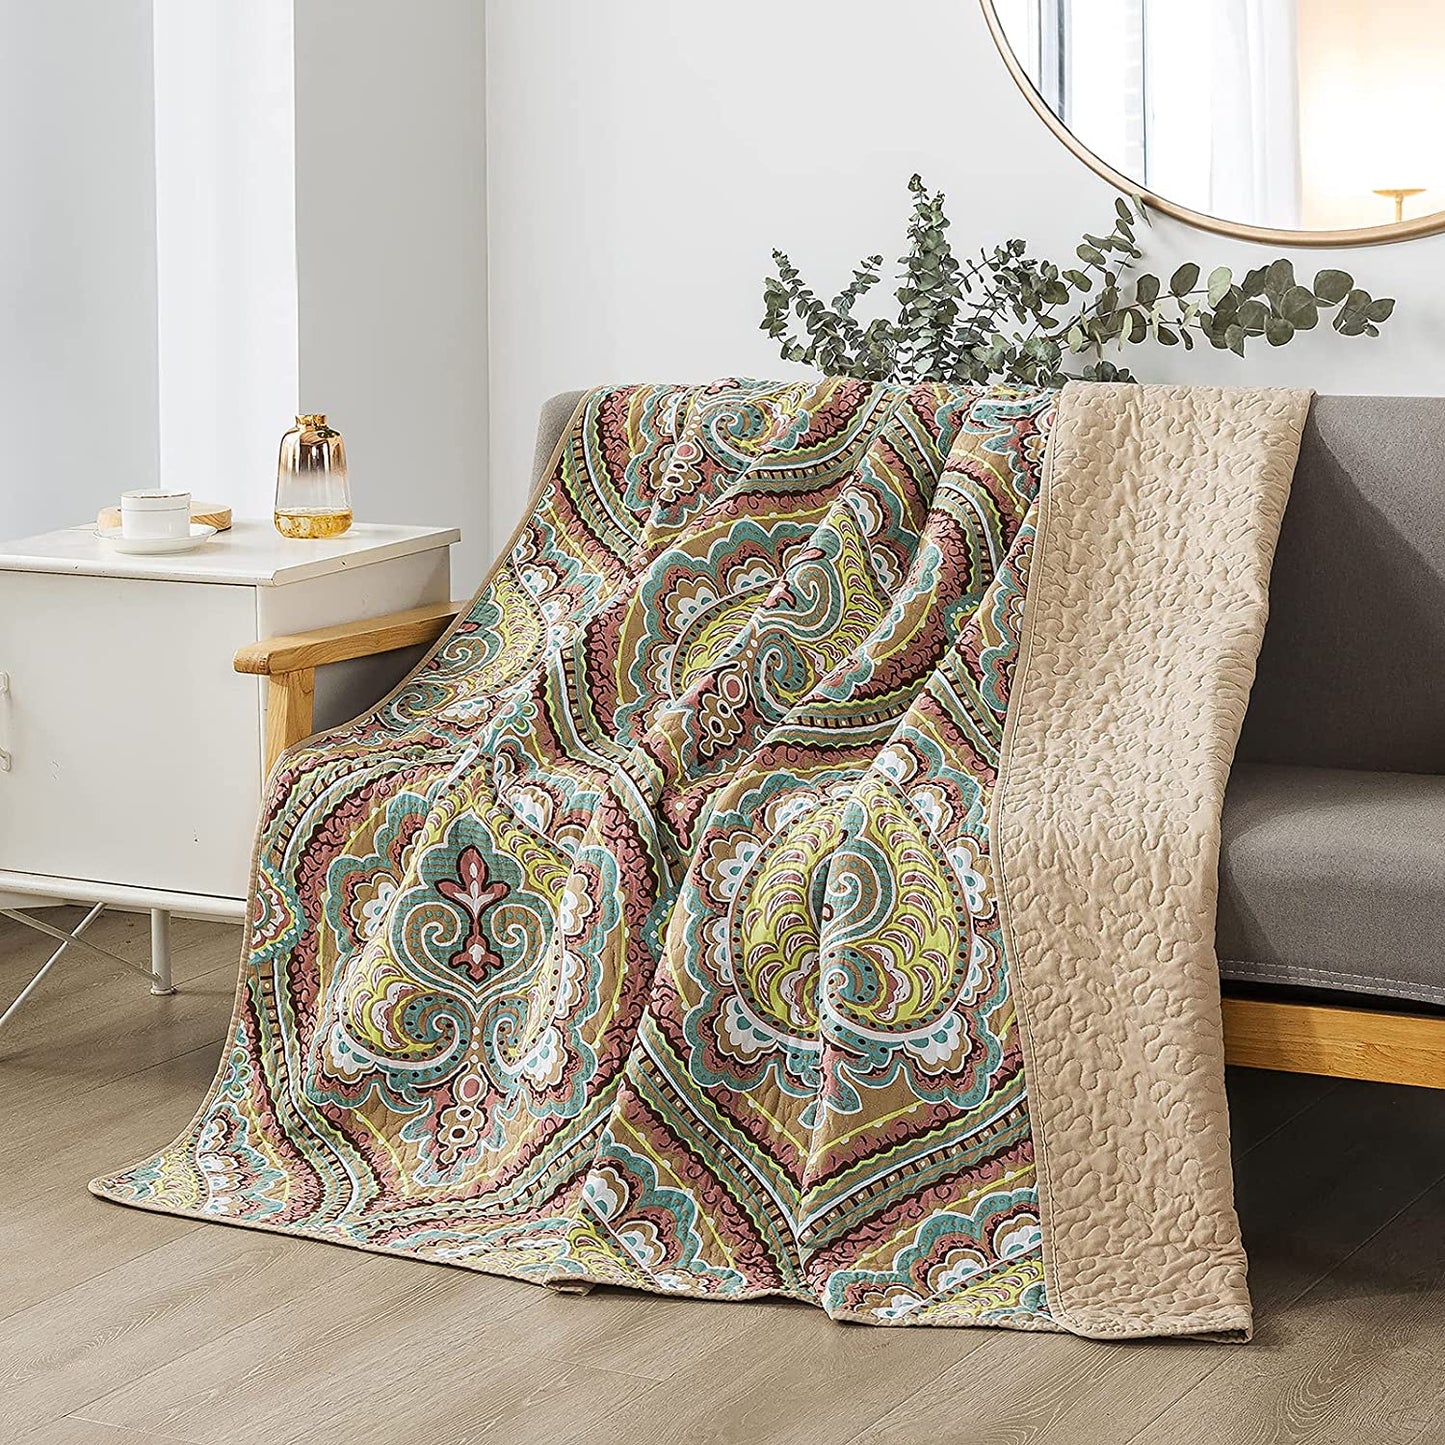 Quilted Throw Blanket for Bed Couch Sofa, European Paisley Blossom